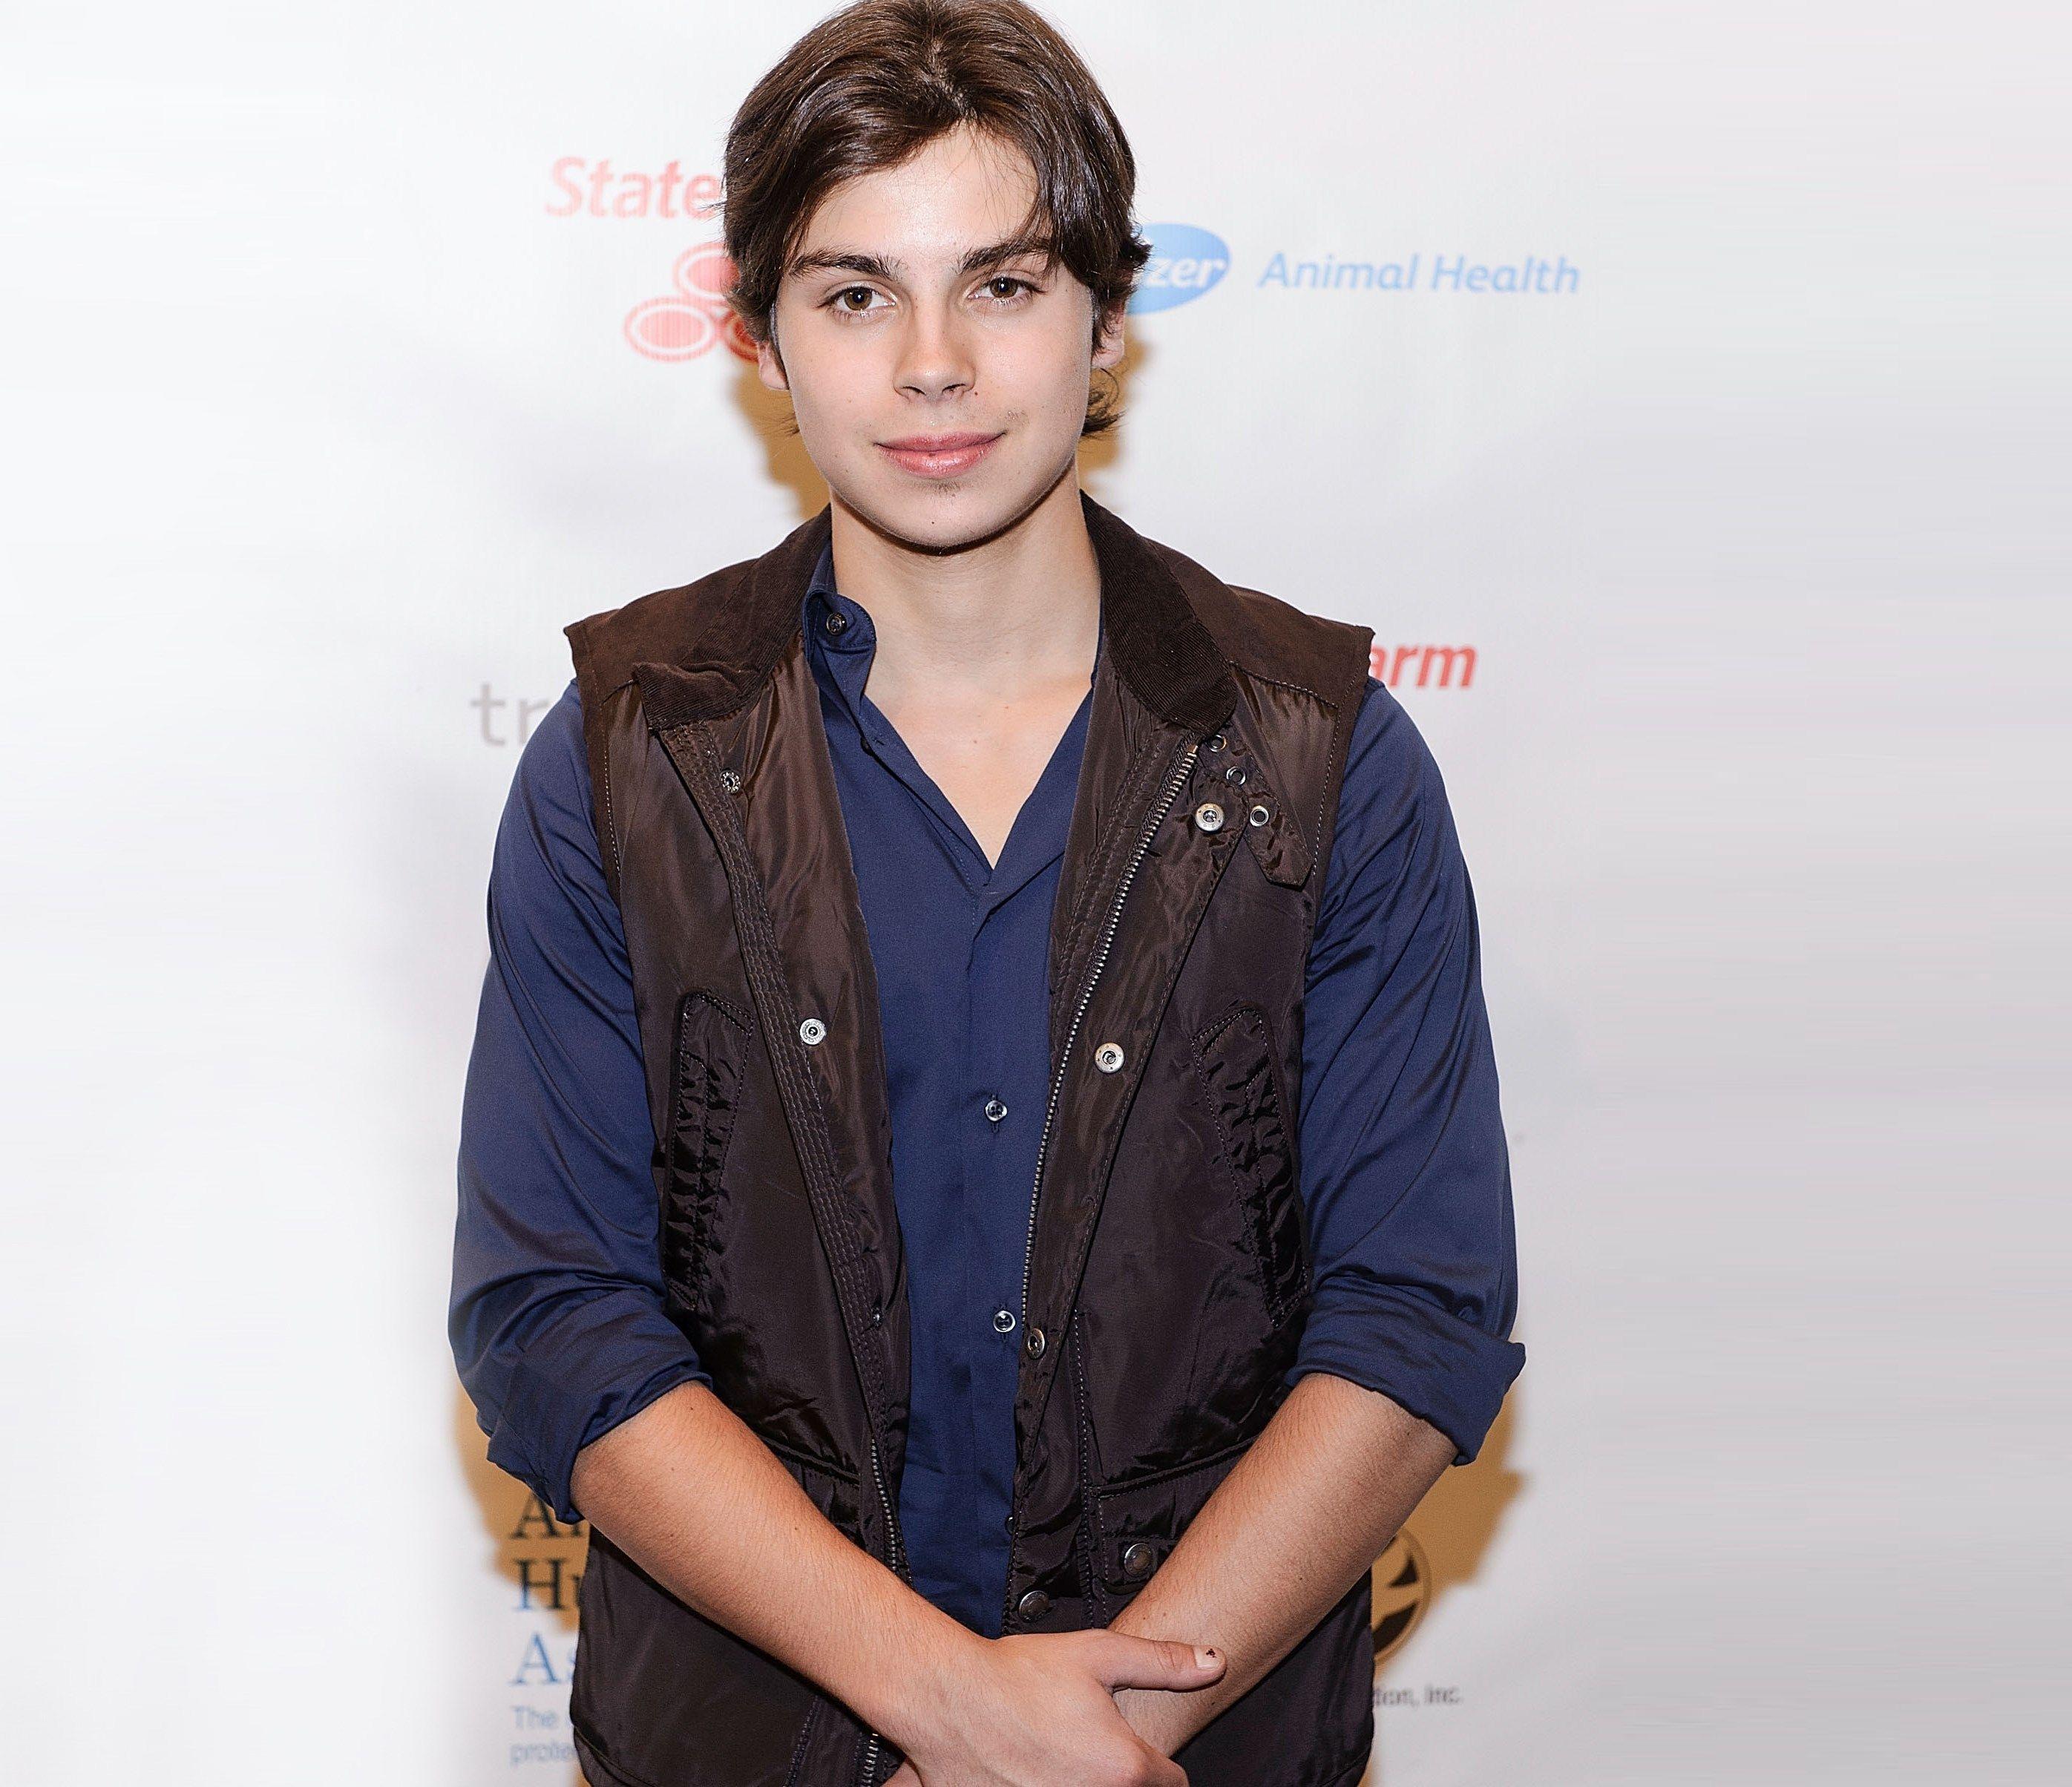 Jake T Austin. Known people people news and biographies